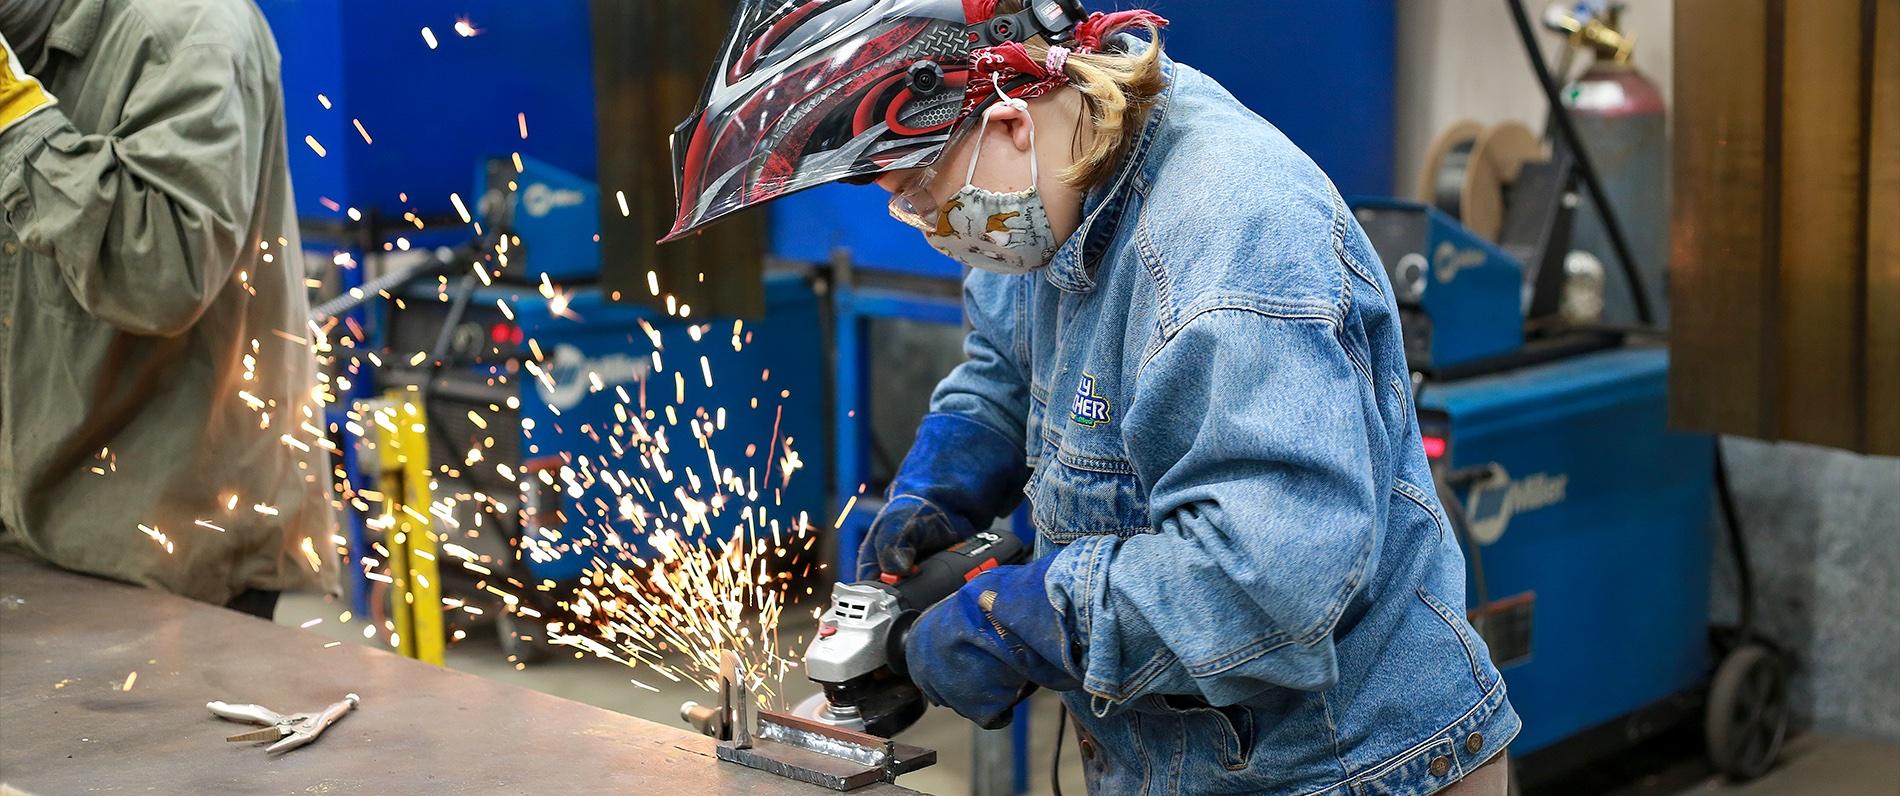 person welding with sparks flying out